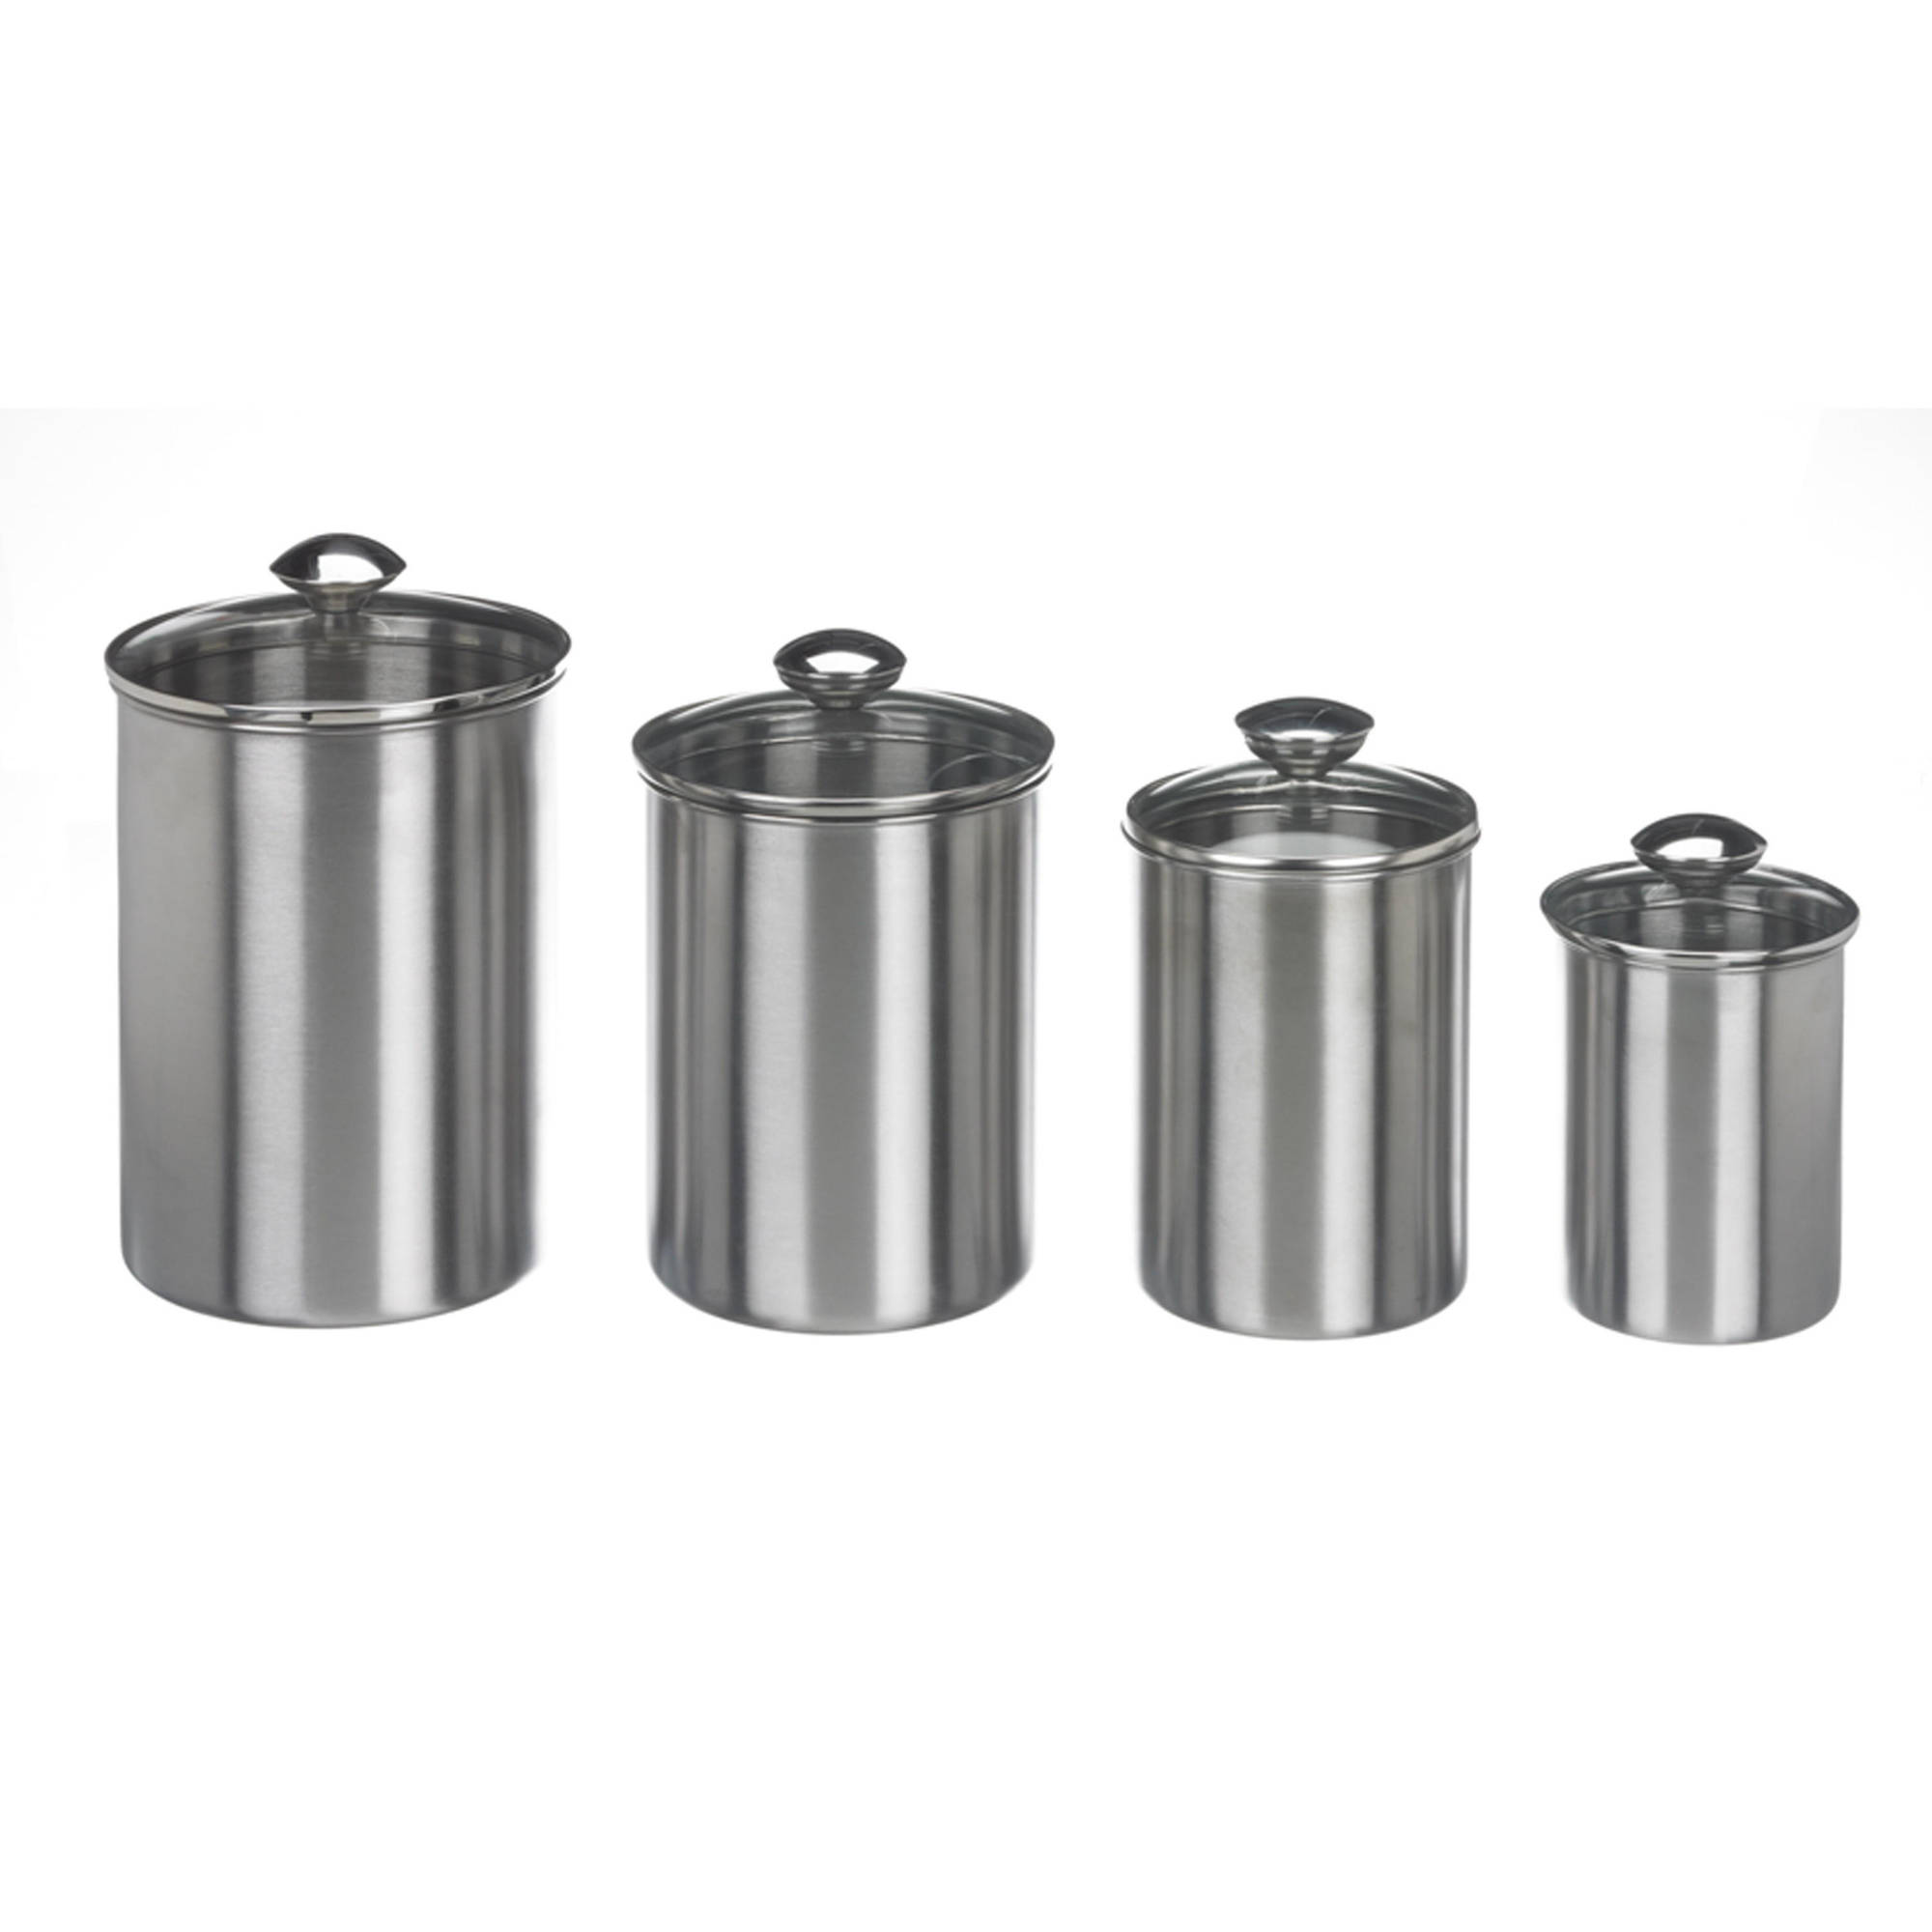 Mainstays Canisters - image 1 of 1